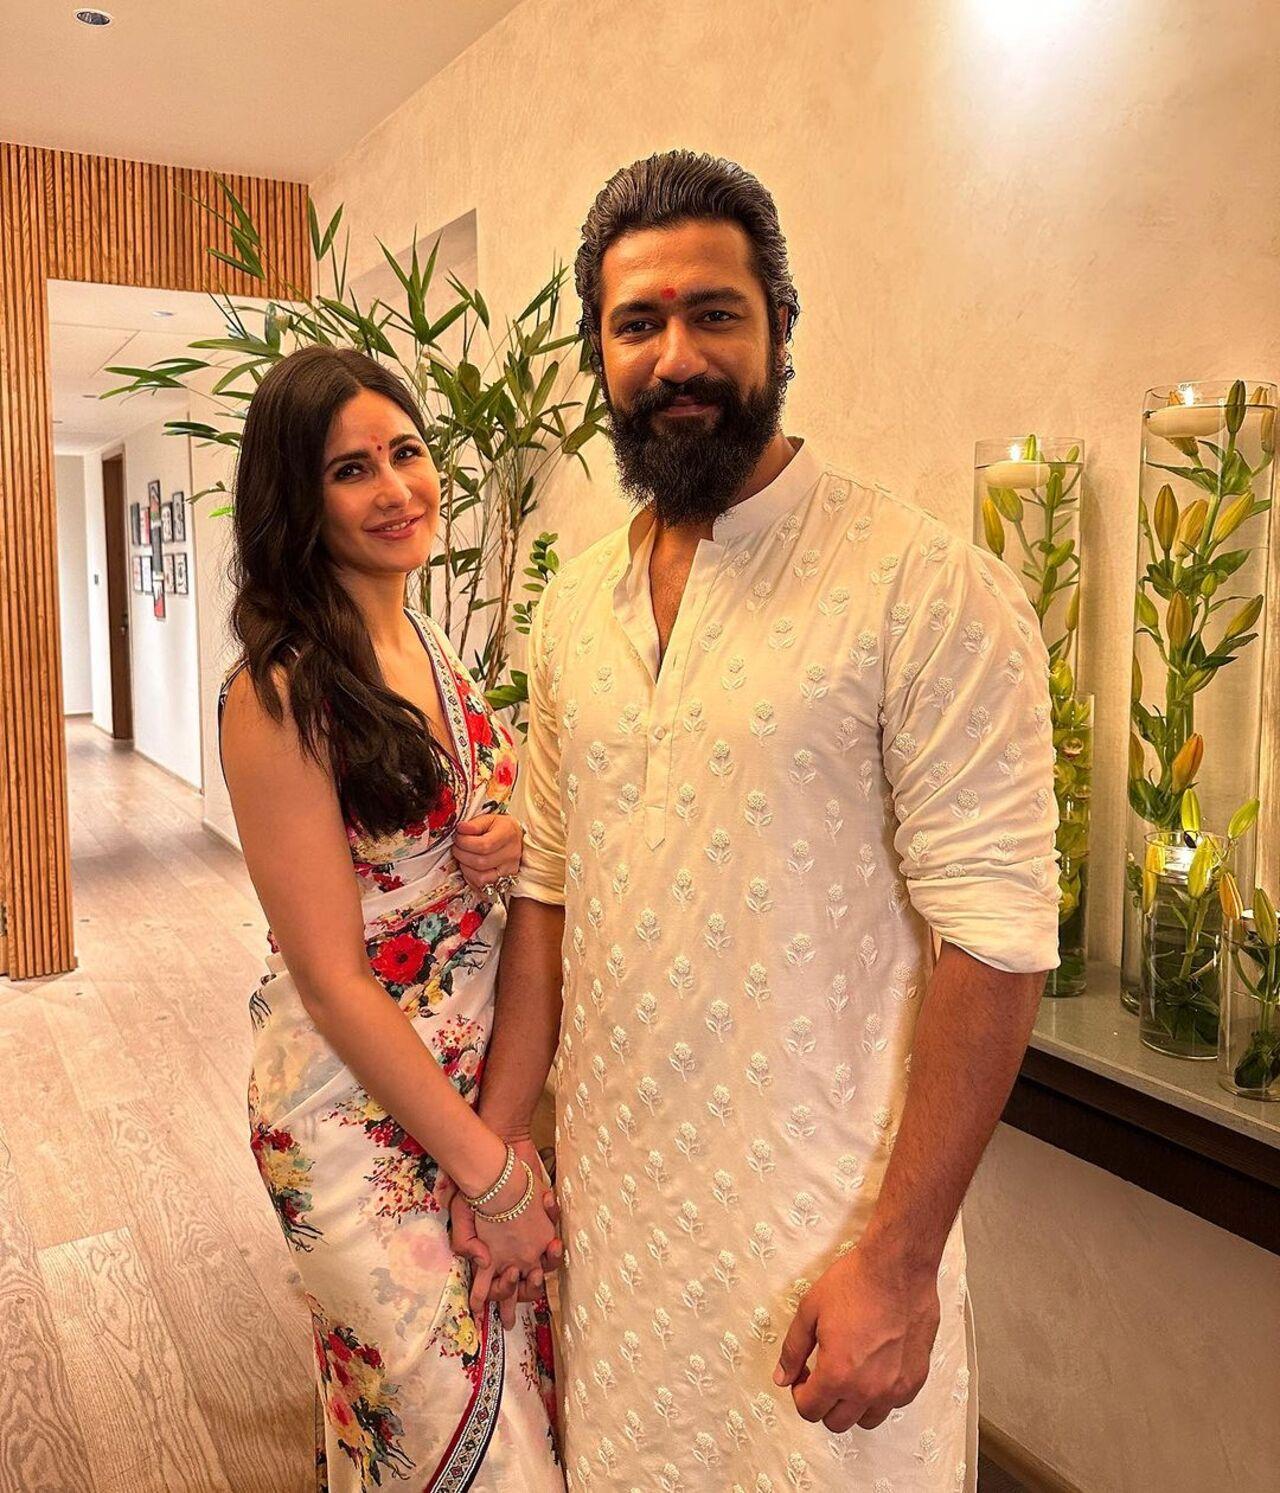 Vicky Kaushal and Katrina Kaif celebrated Diwali 2023 with their family members. The actress' siblings joined in for the celebration. She looked pretty in a floral saree and he wore a kurta